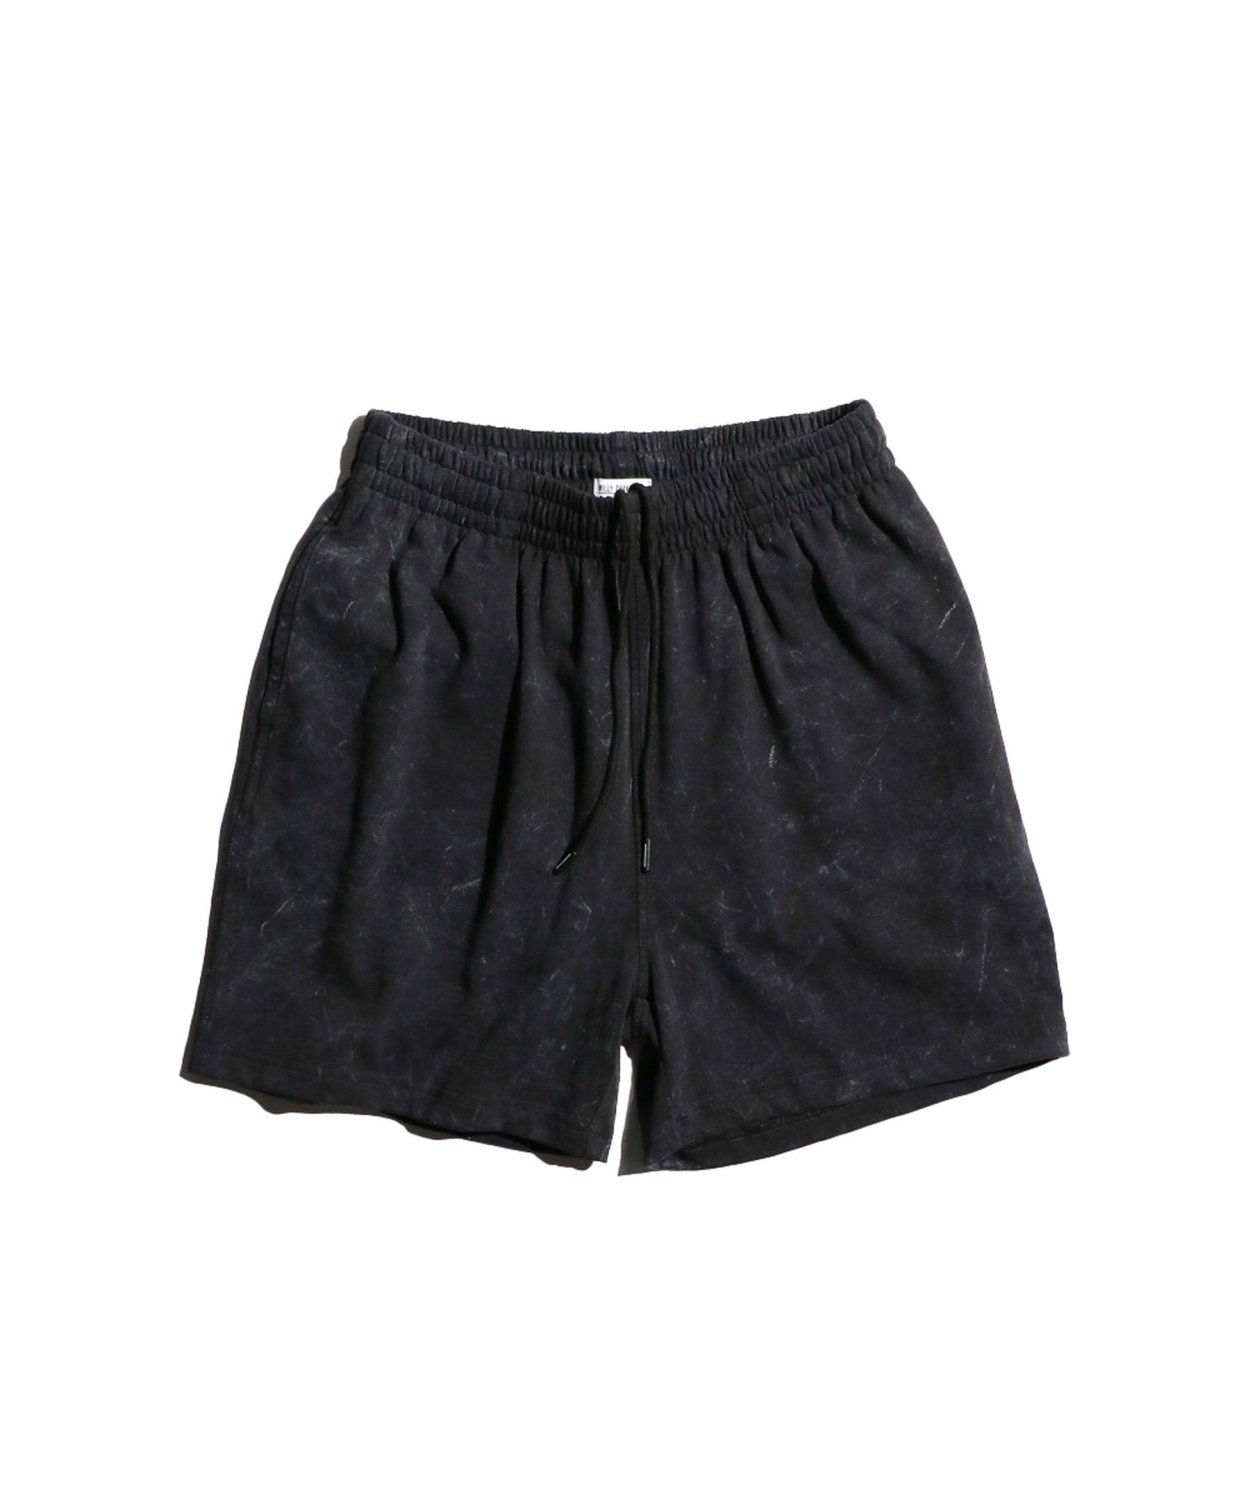 WILLY CHAVARRIA / NORTHSIDER SHORTS